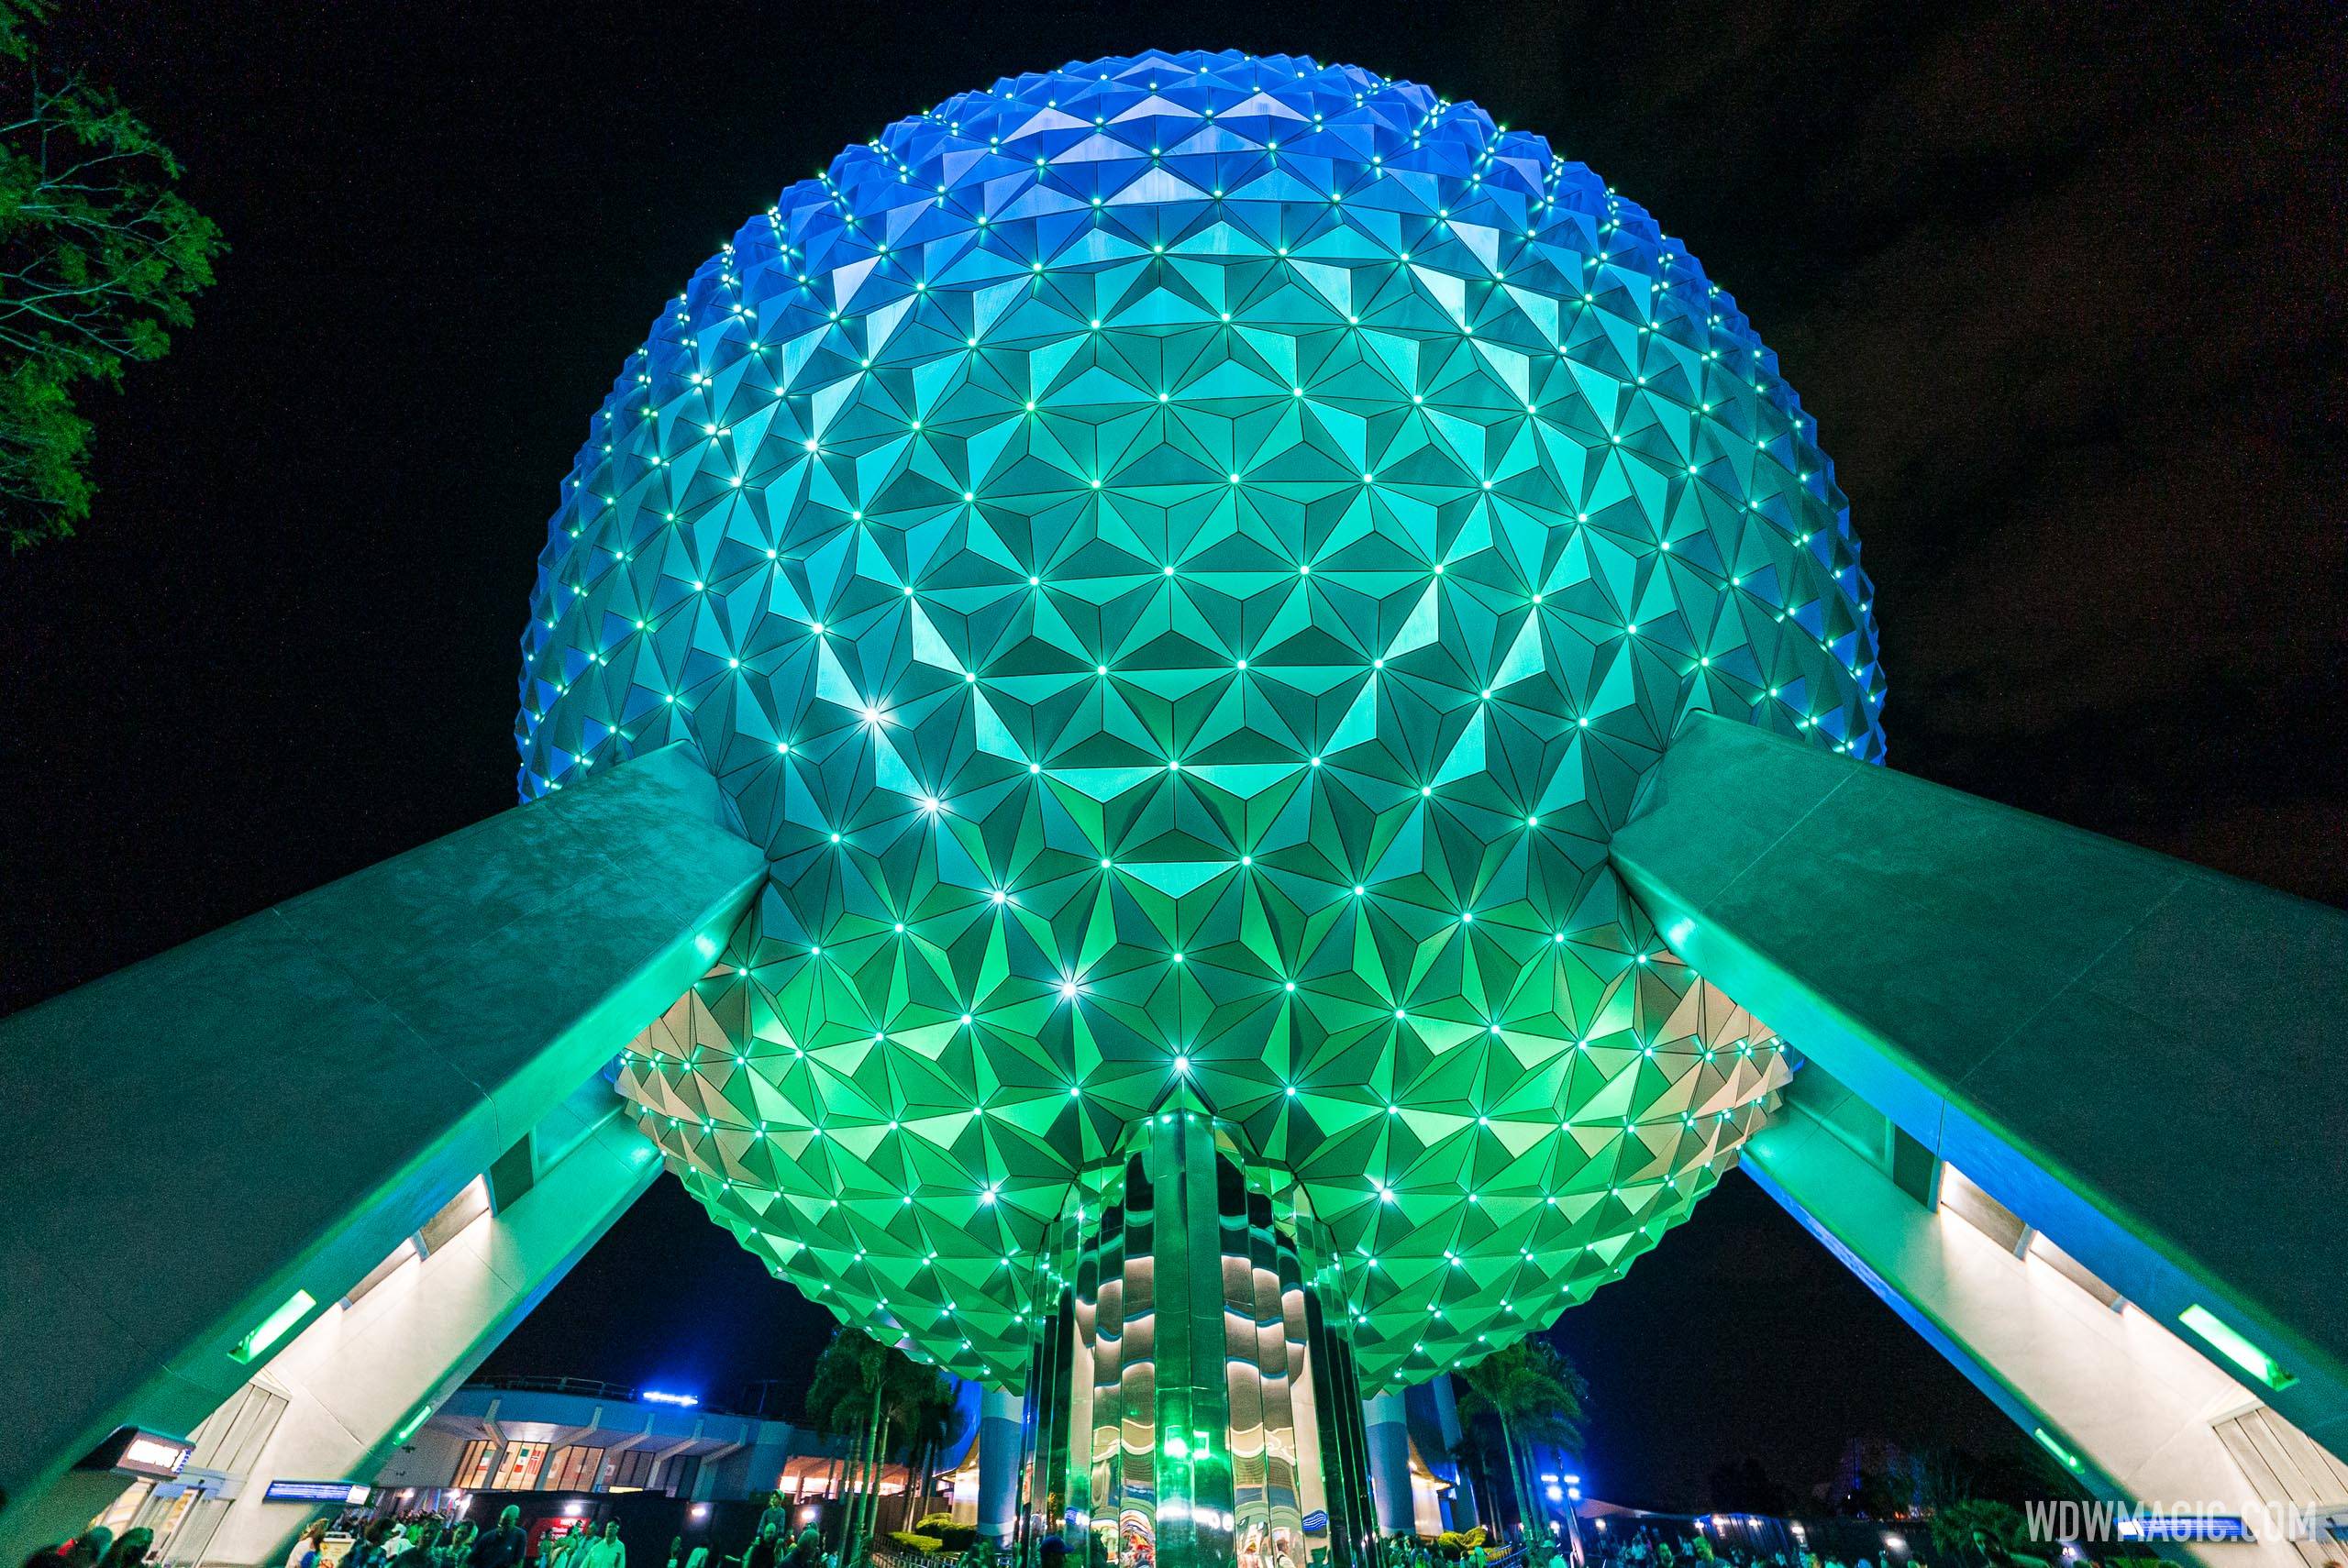 Spaceship Earth Colors of the Wind lighting design